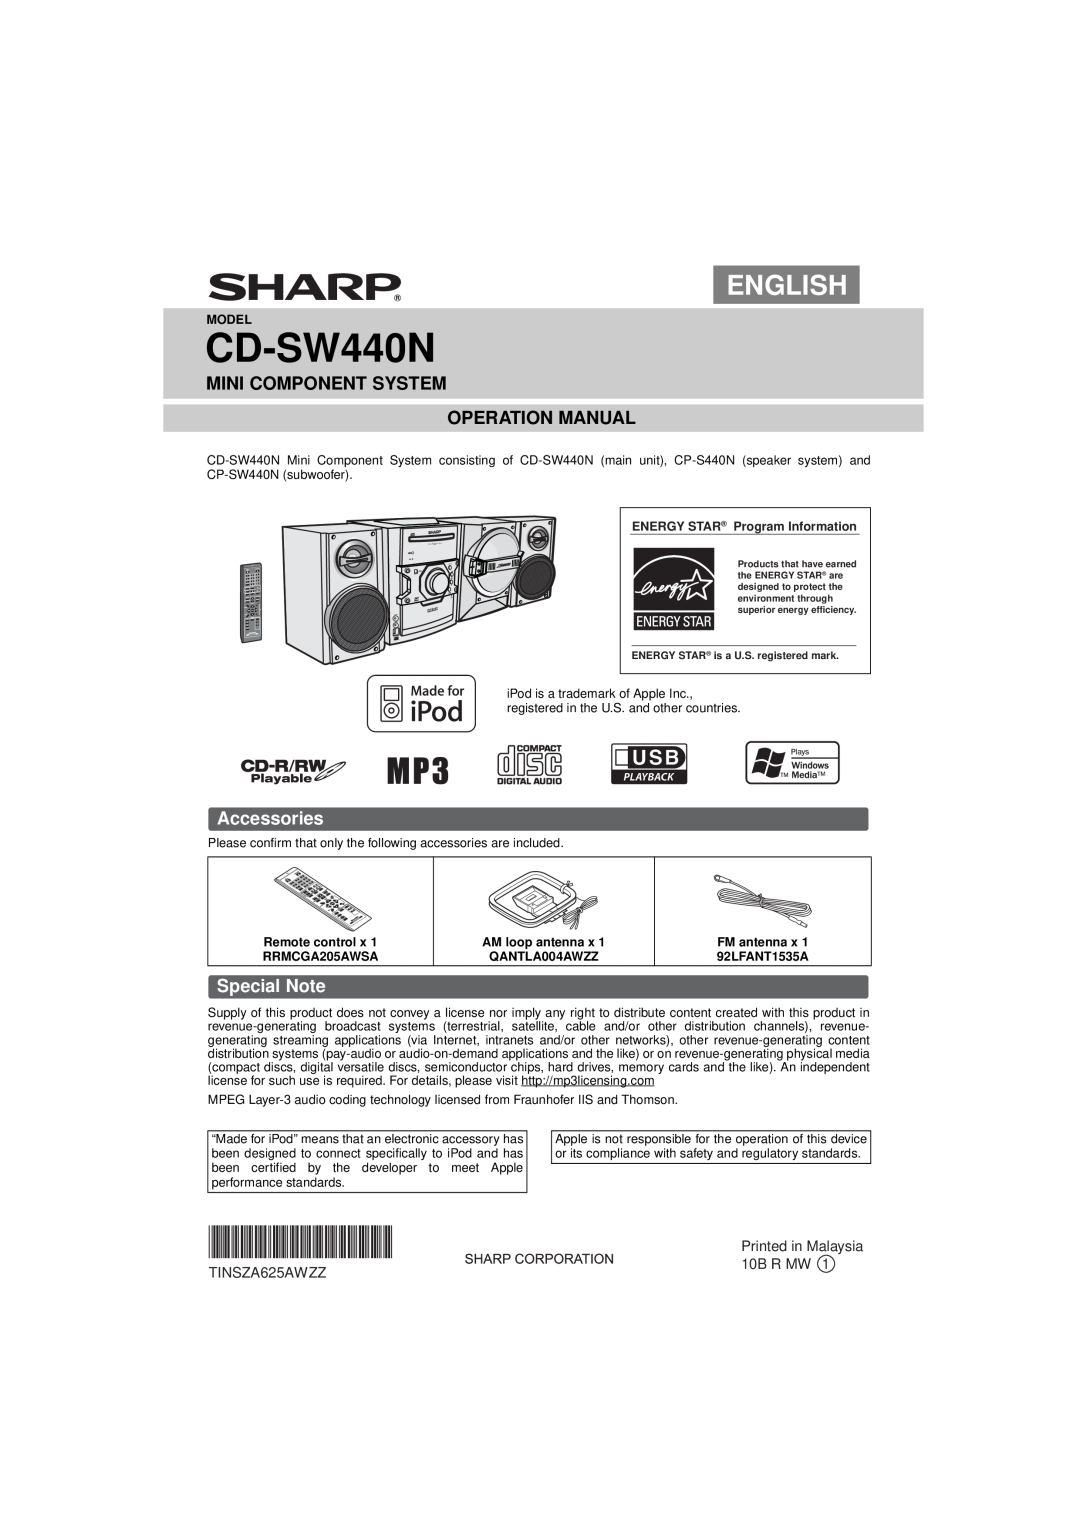 Sharp CD-SW440N operation manual Accessories, Special Note, English, TINSZA625AWZZ 